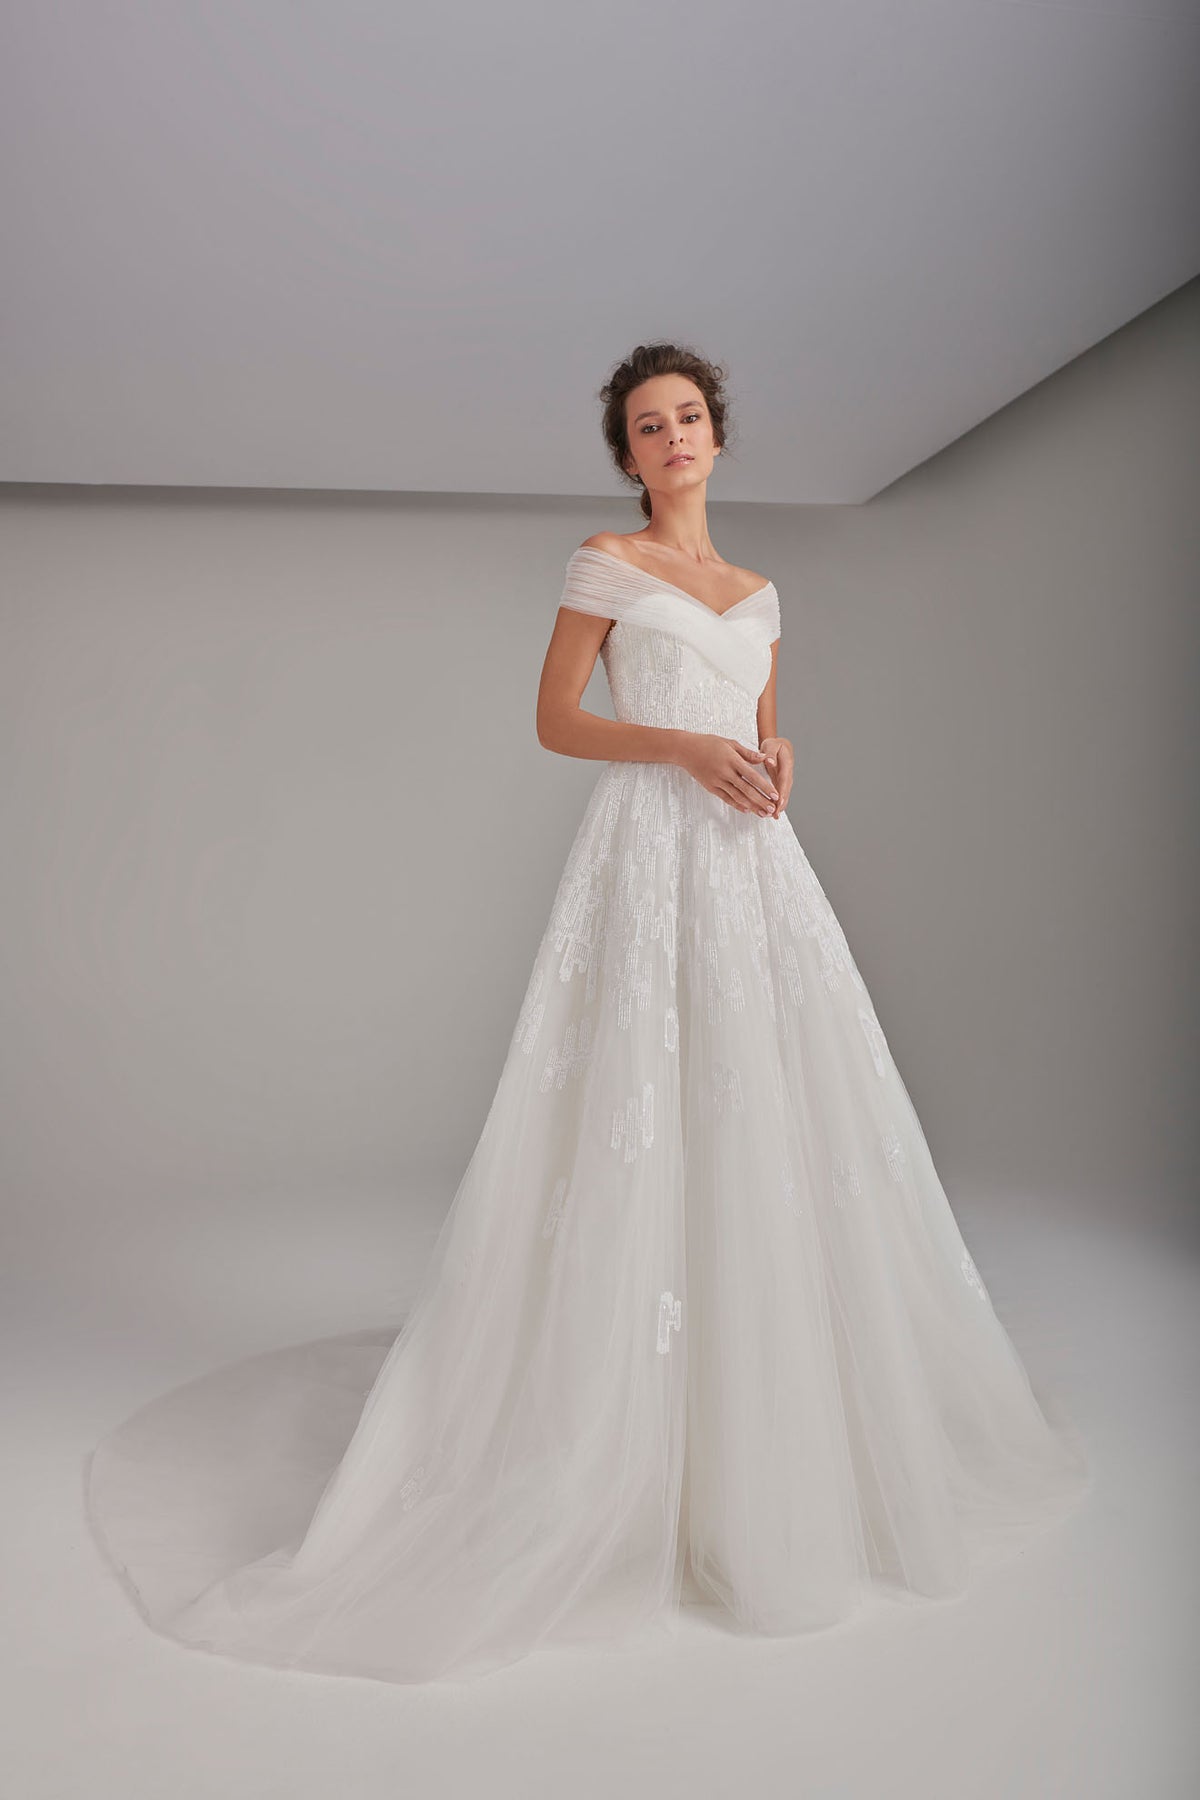 Richly embroidered off-shoulder wedding dress with long train